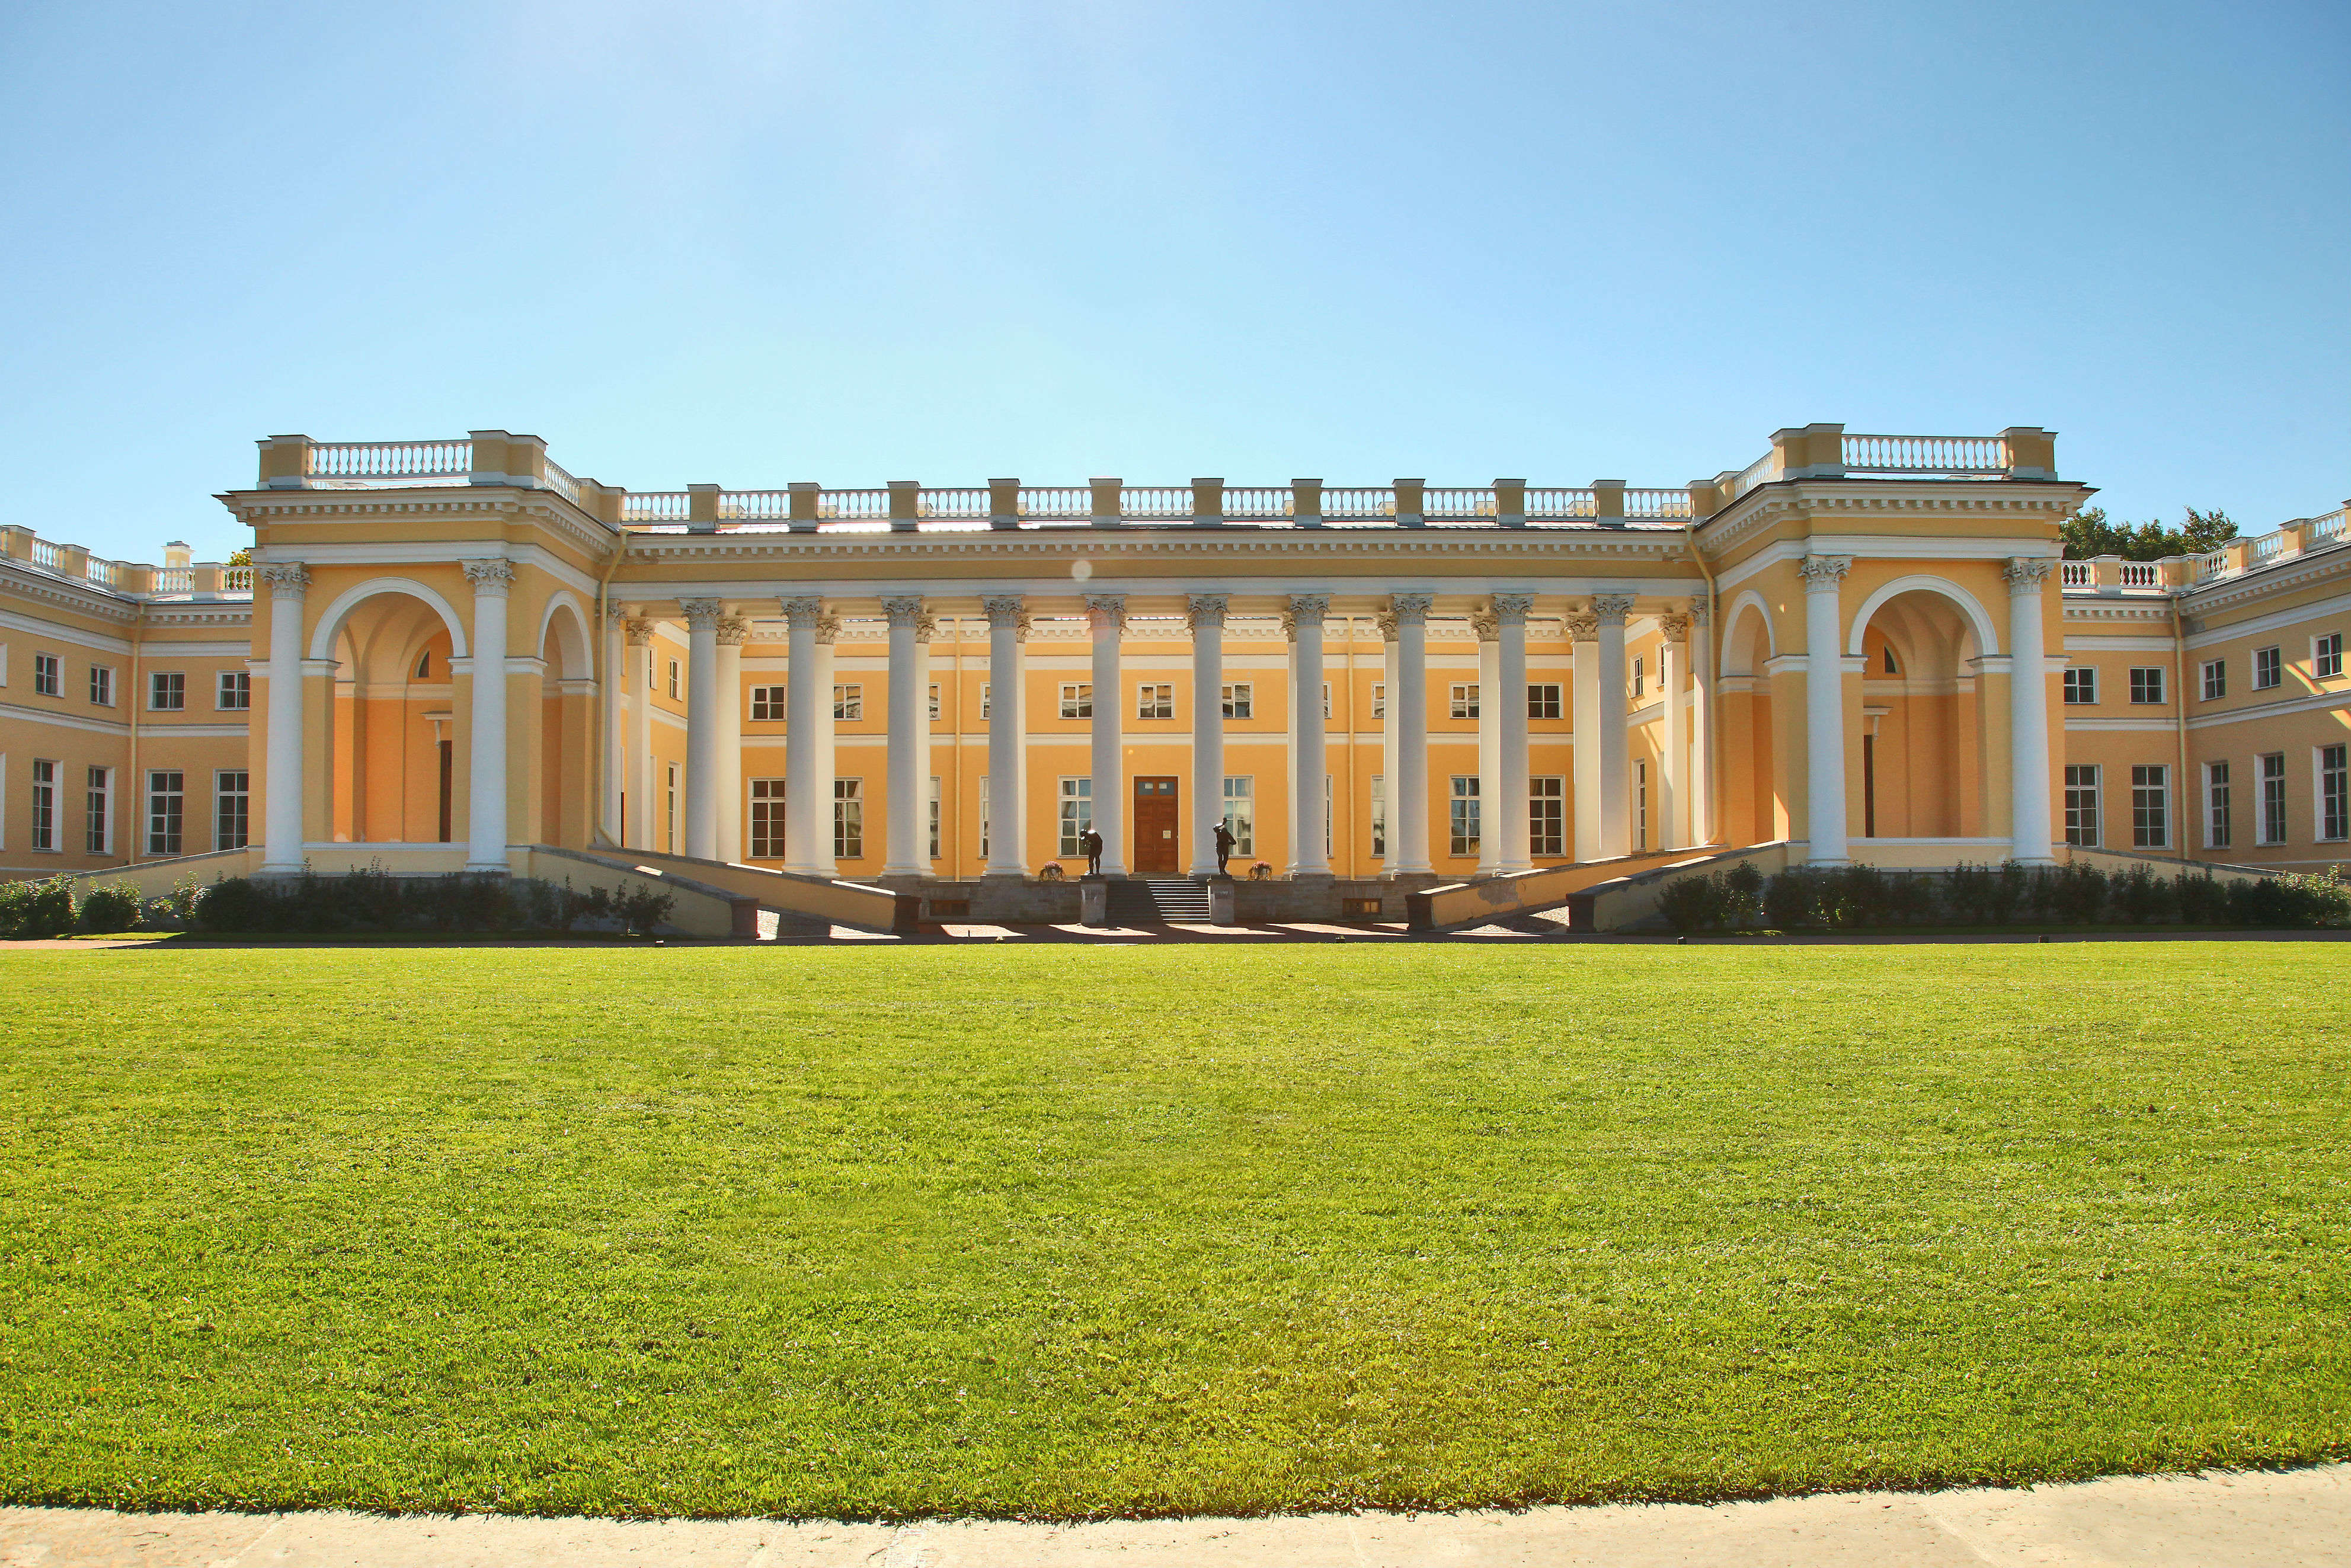 The opulent Alexander Palace of Saint Petersburg is to reopen in 2020